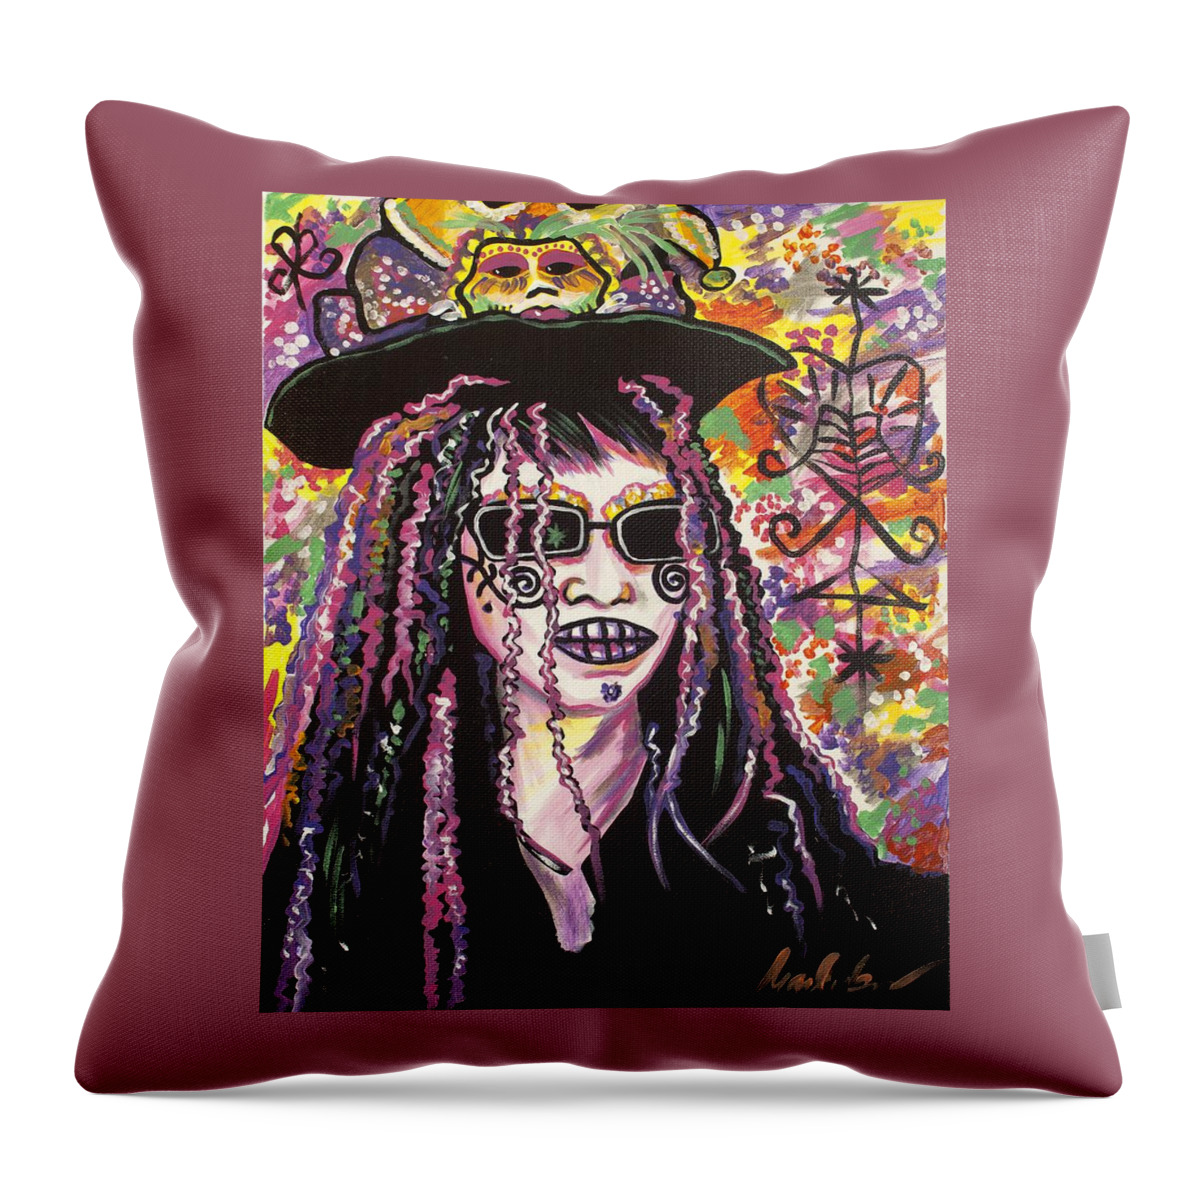 Mardiclaw Throw Pillow featuring the painting Mammawannabone by Mardi Claw